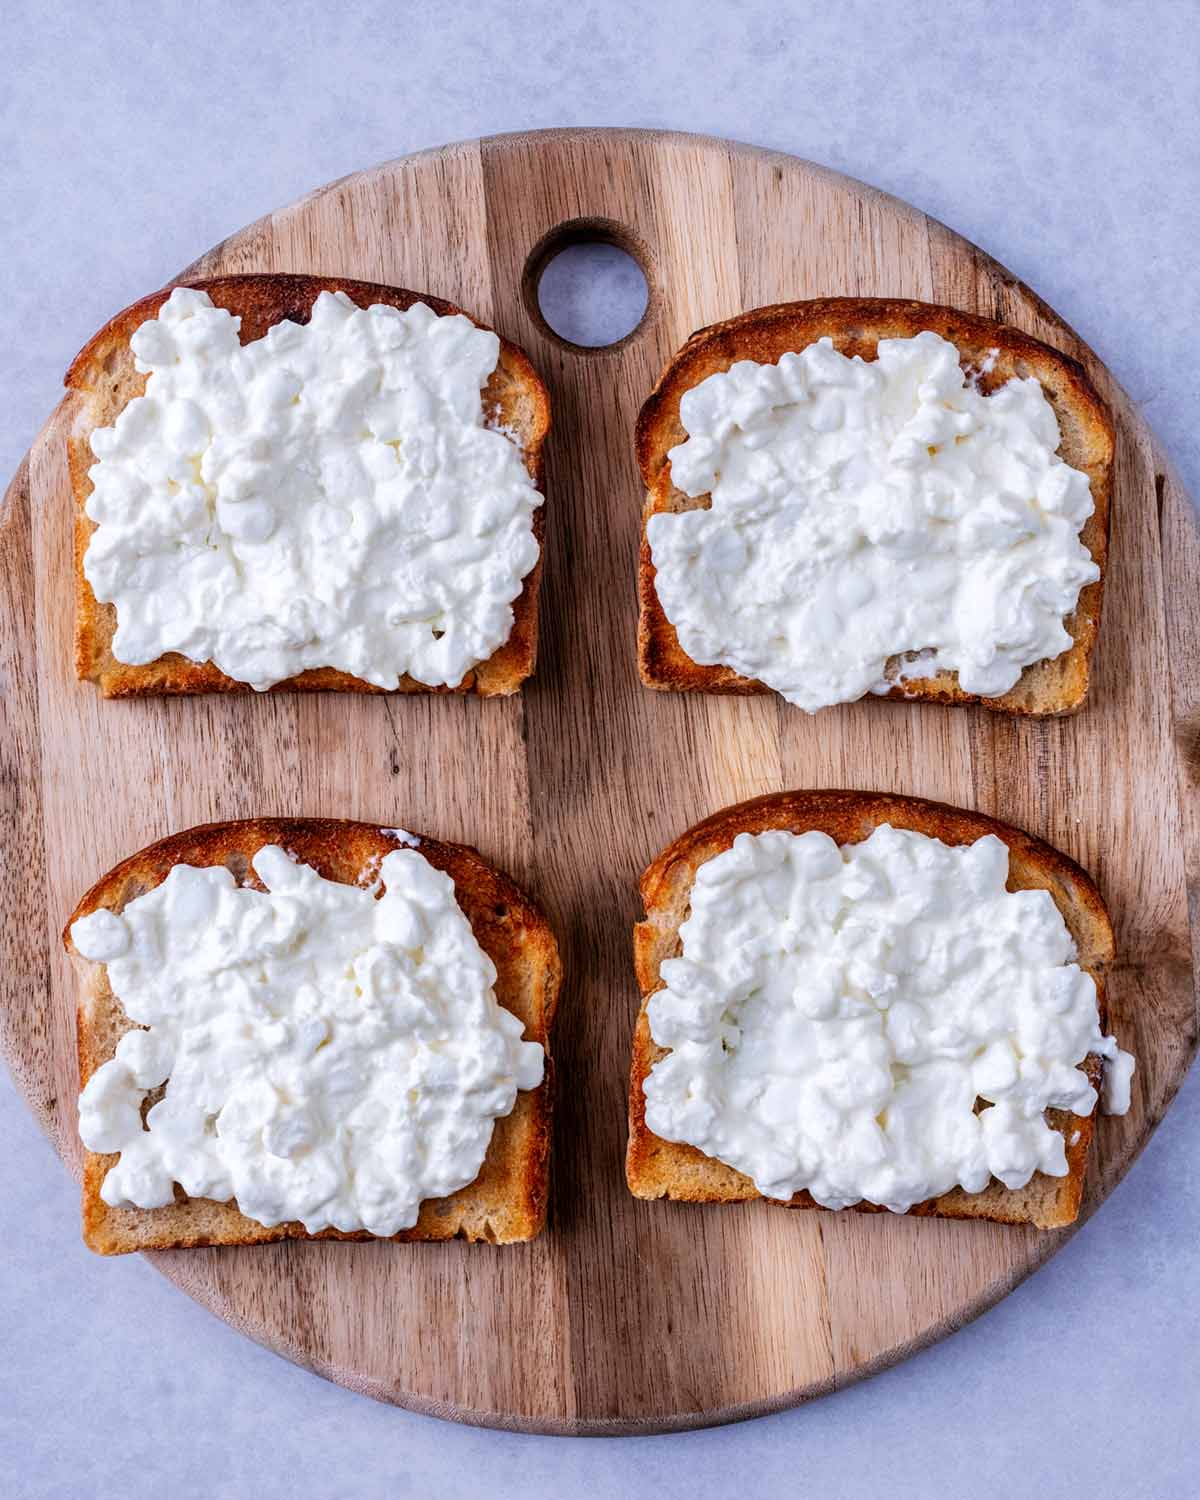 Cottage cheese spread over the toast.